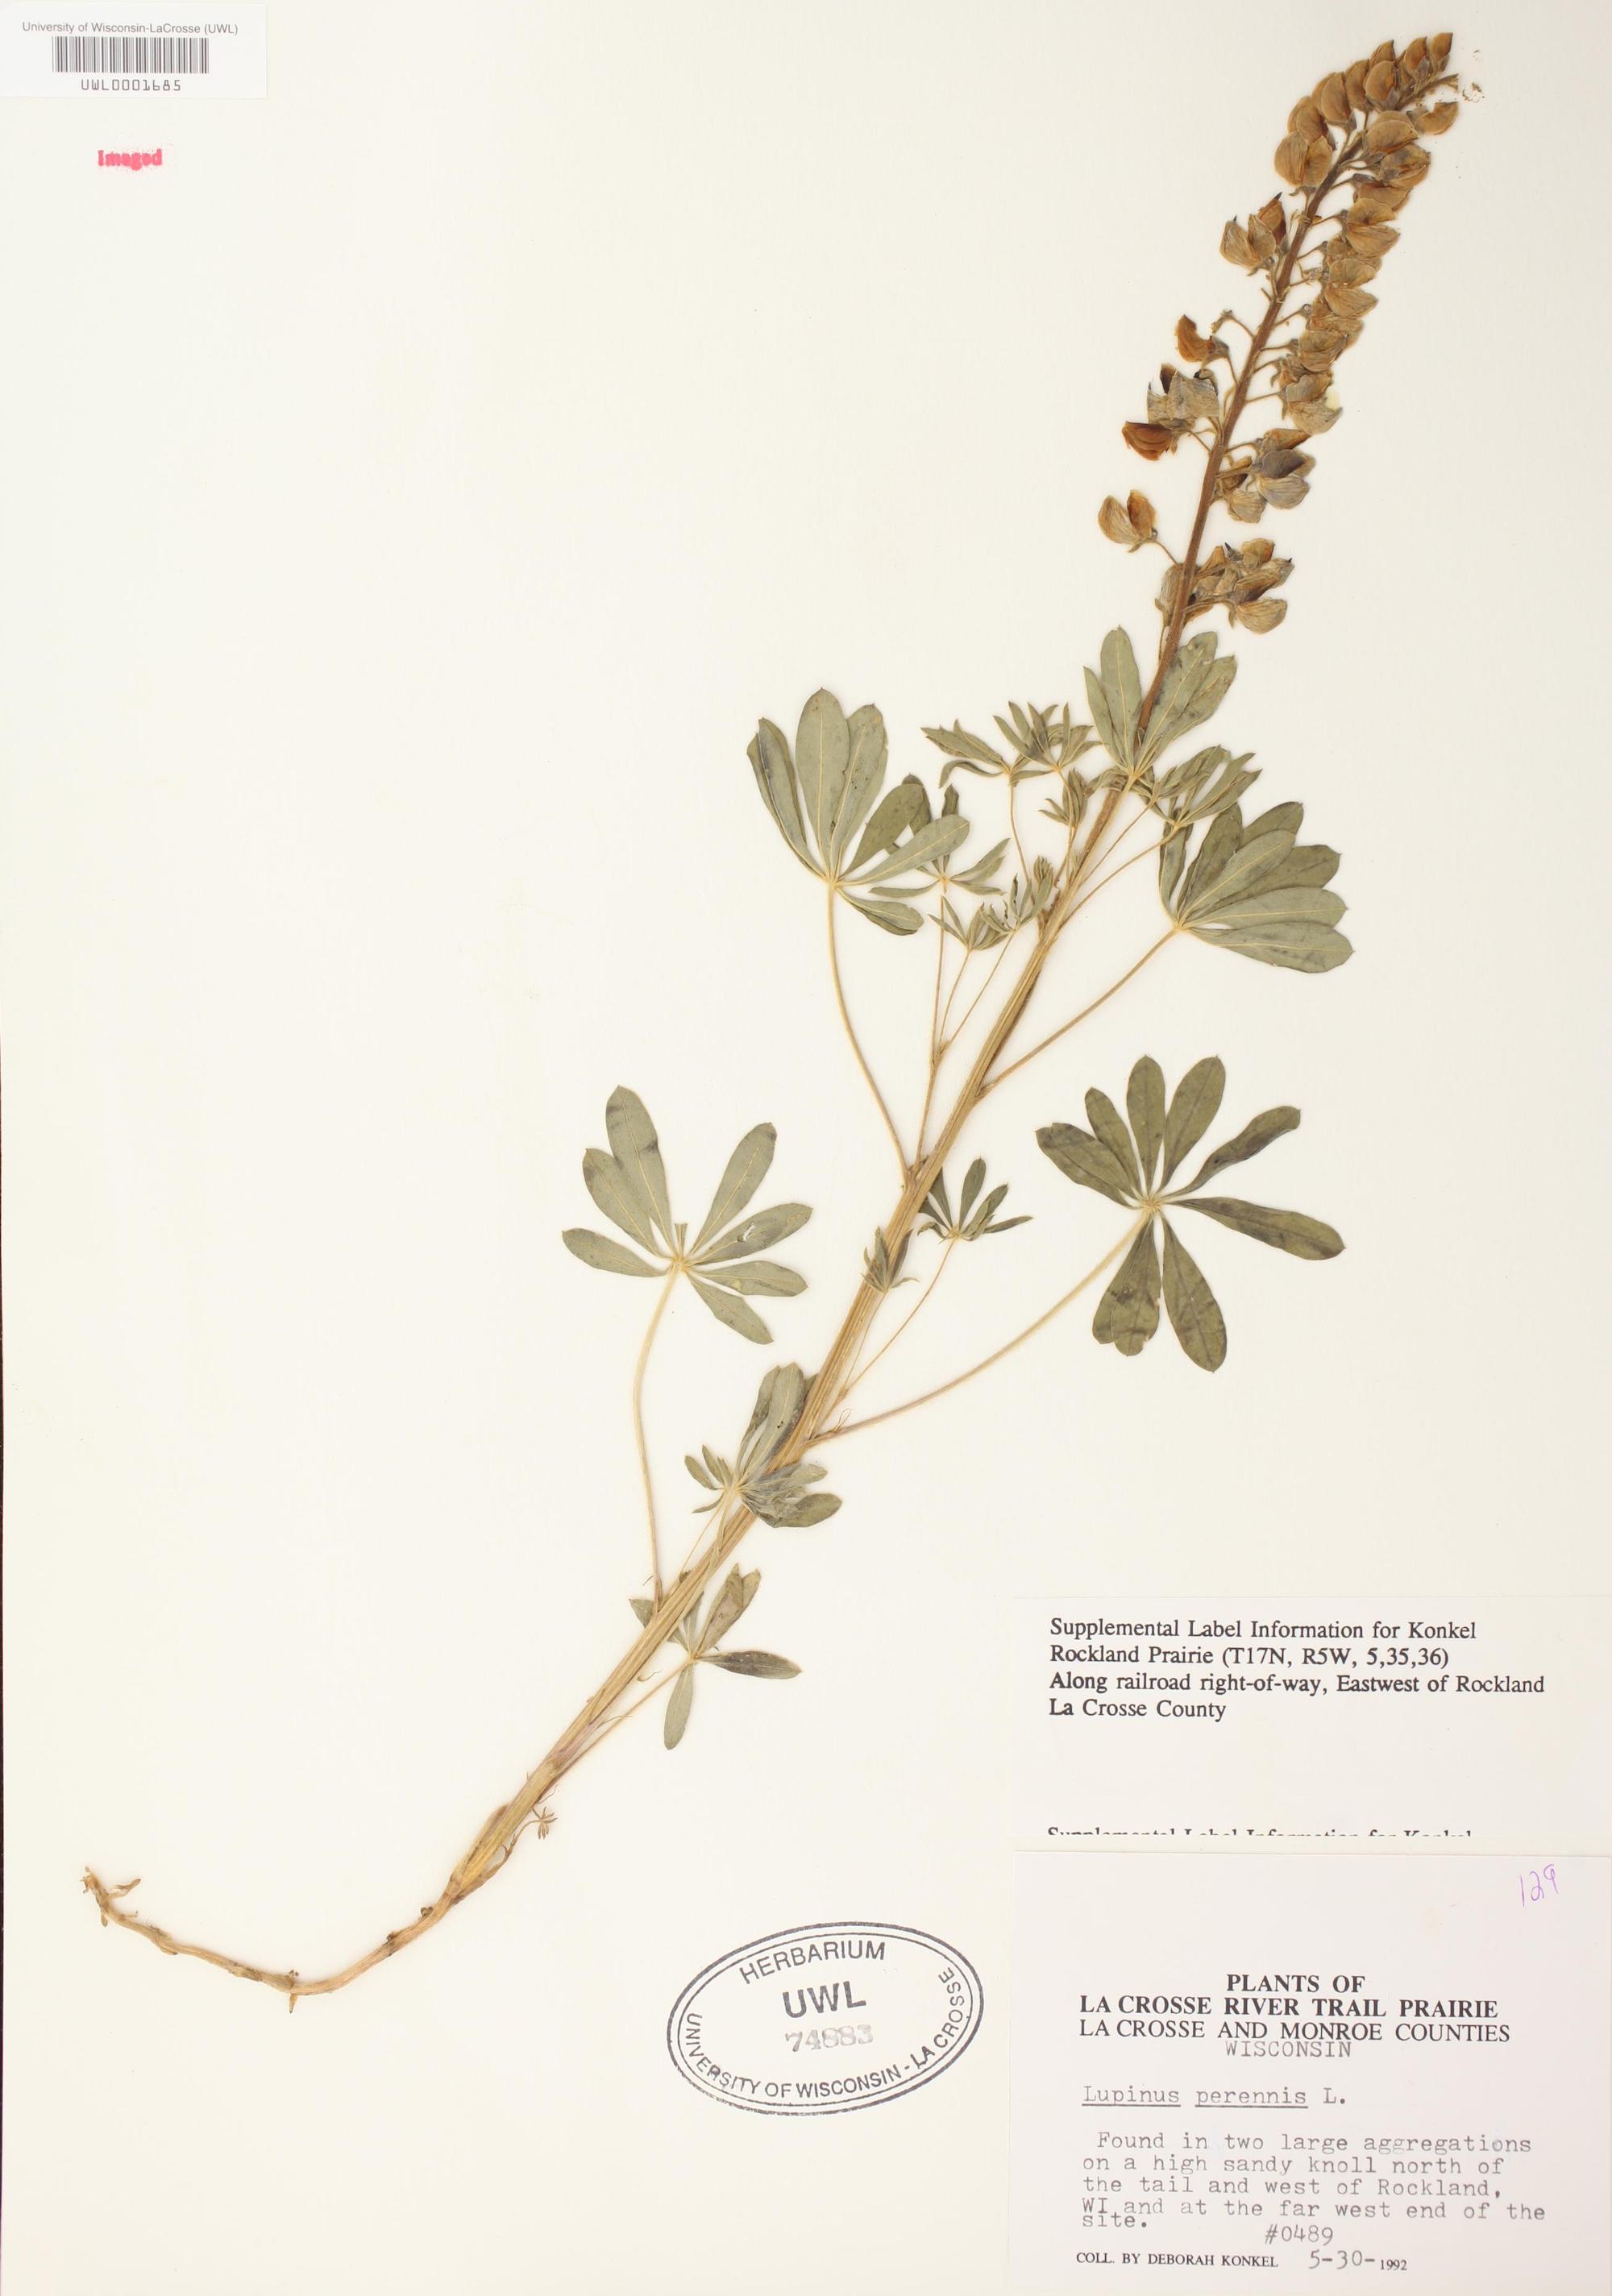 Wild Lupine specimen collected on May 30, 1992 west of Rockland, Wisconsin.